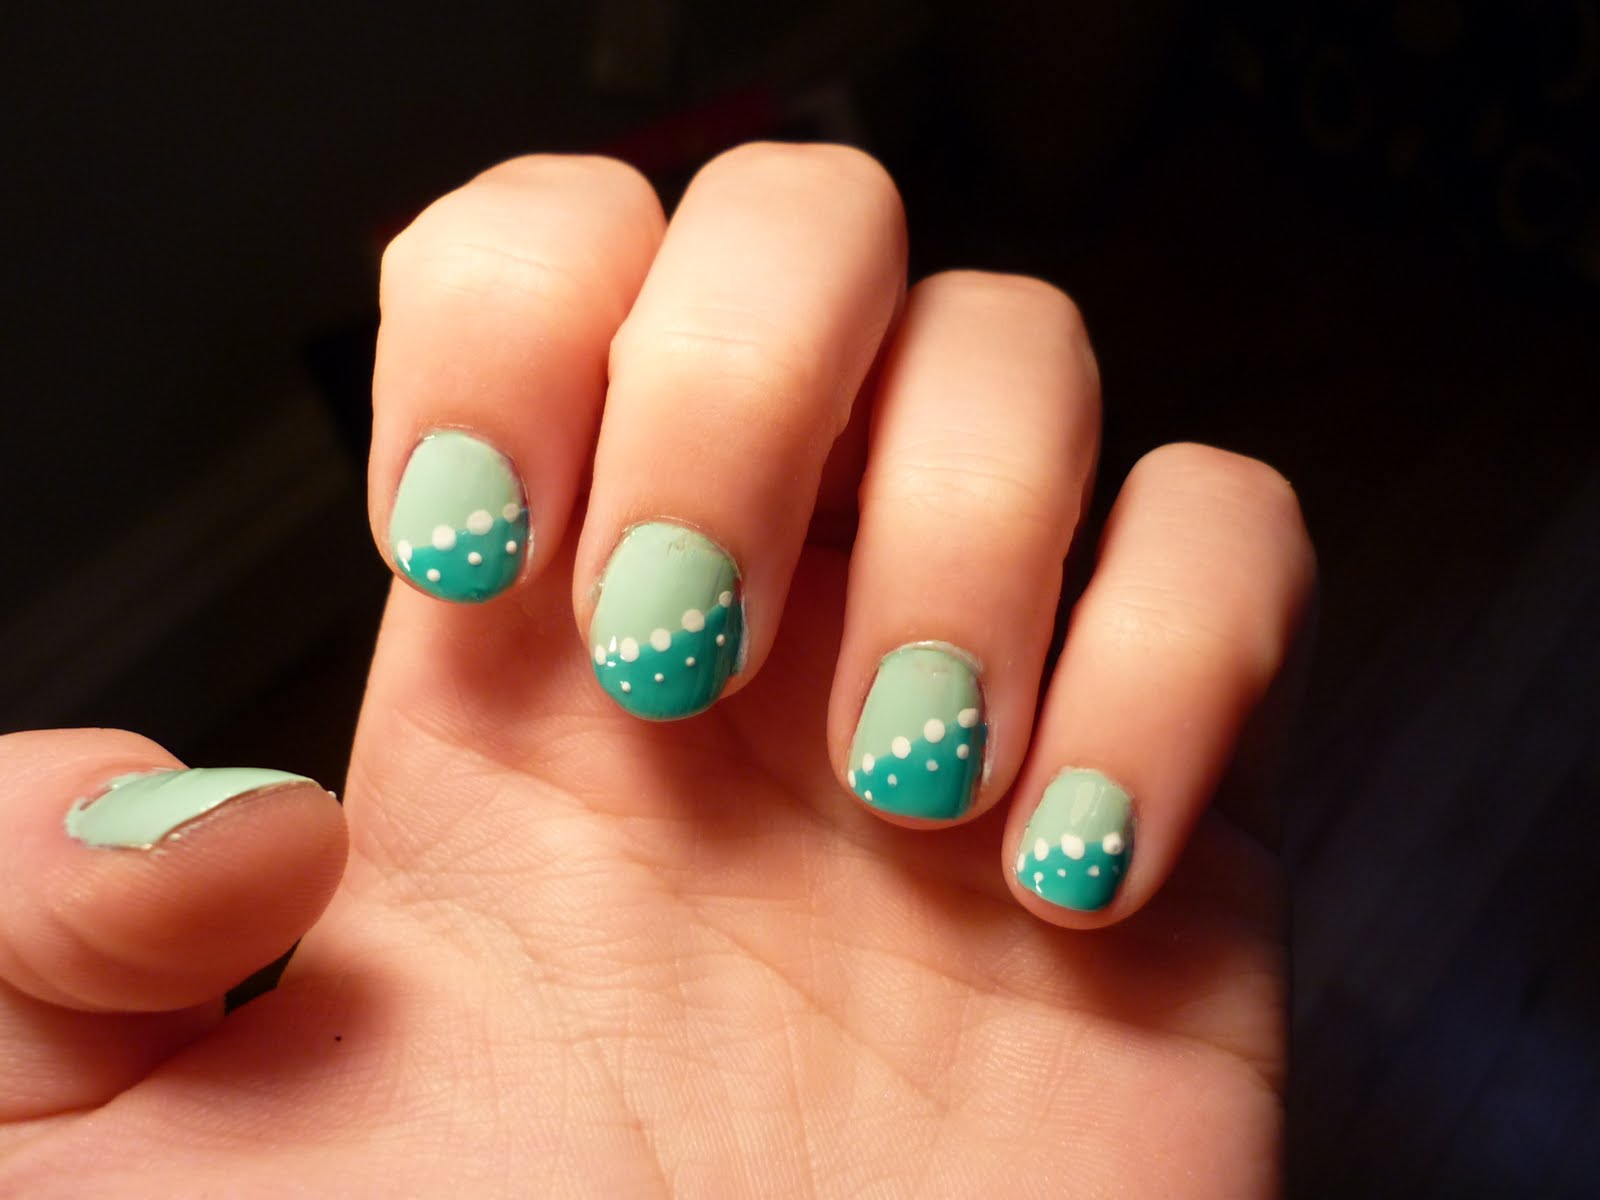 1. Easy DIY Nail Art Ideas for Beginners - wide 2